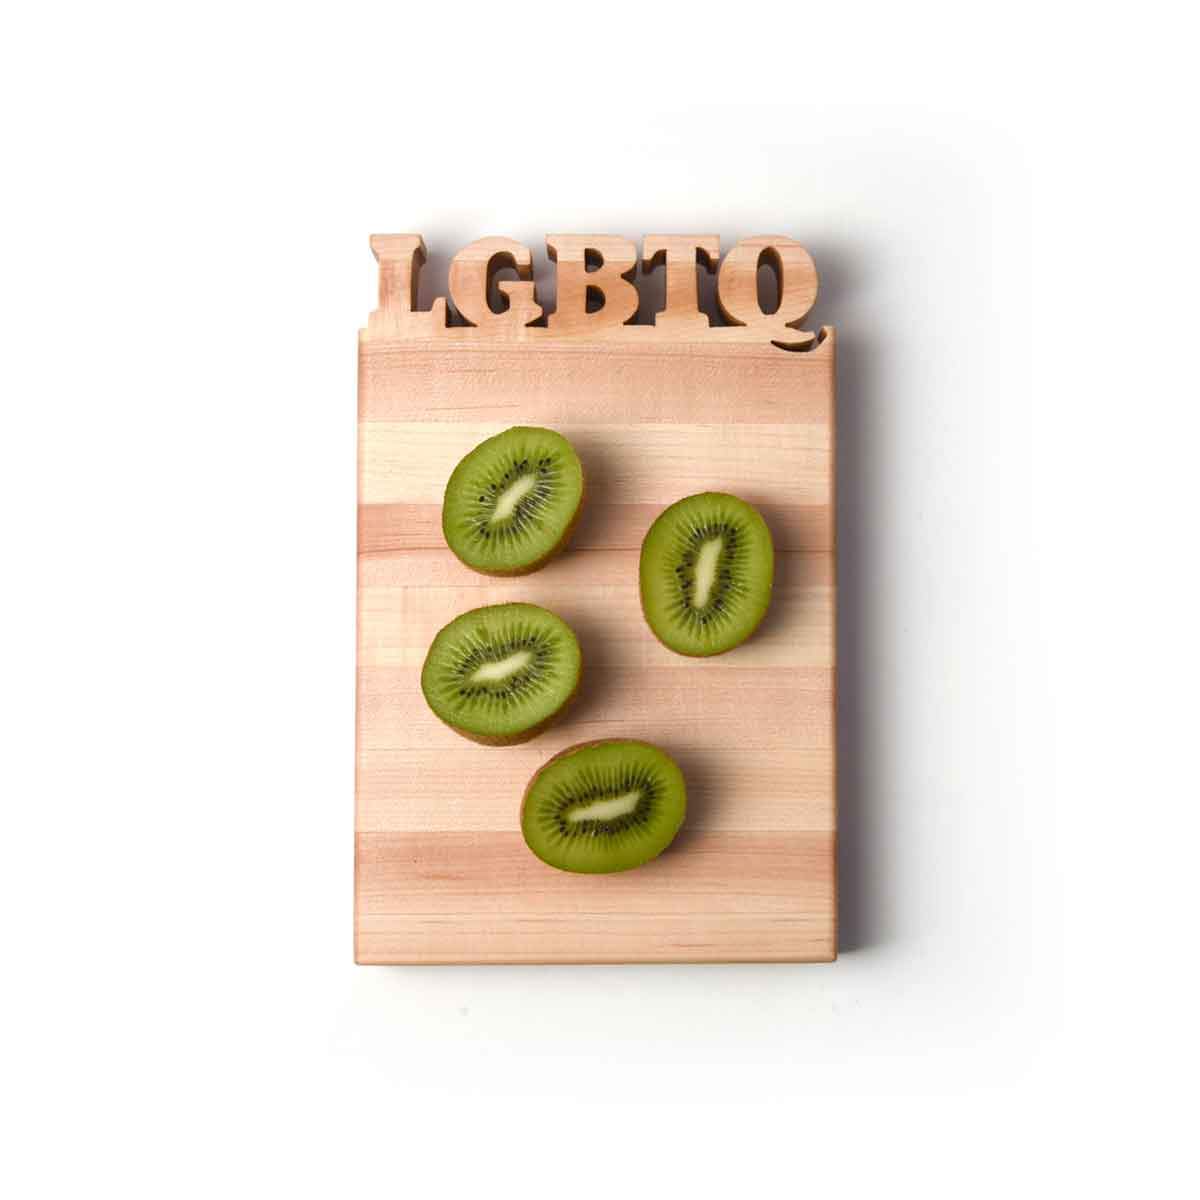 LGBTQ letters cut out of wooden cutting board